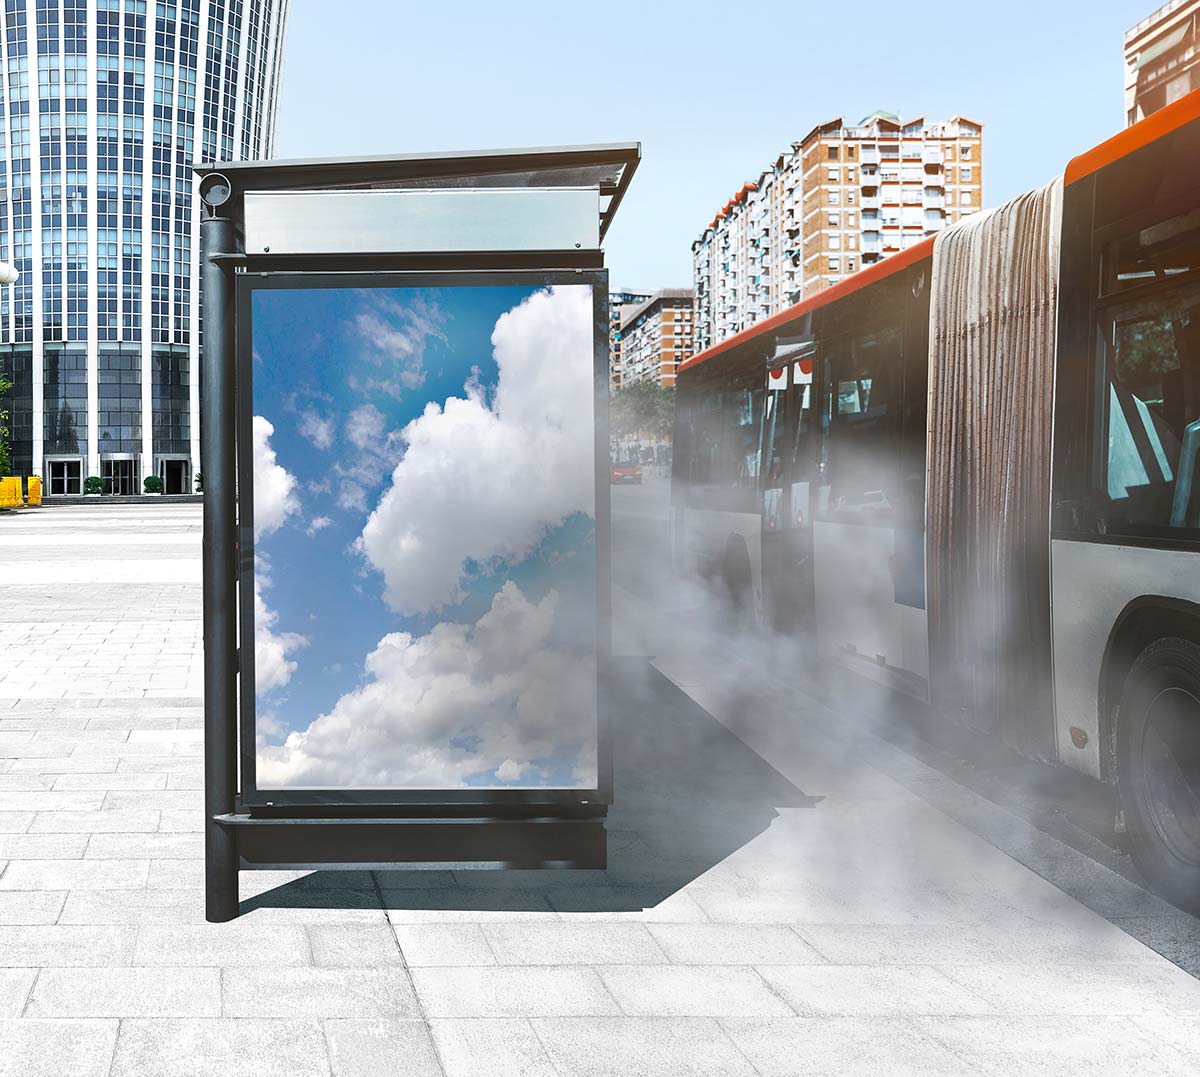 Digital signage at a bus stop in a cloud of pollution from traffic.